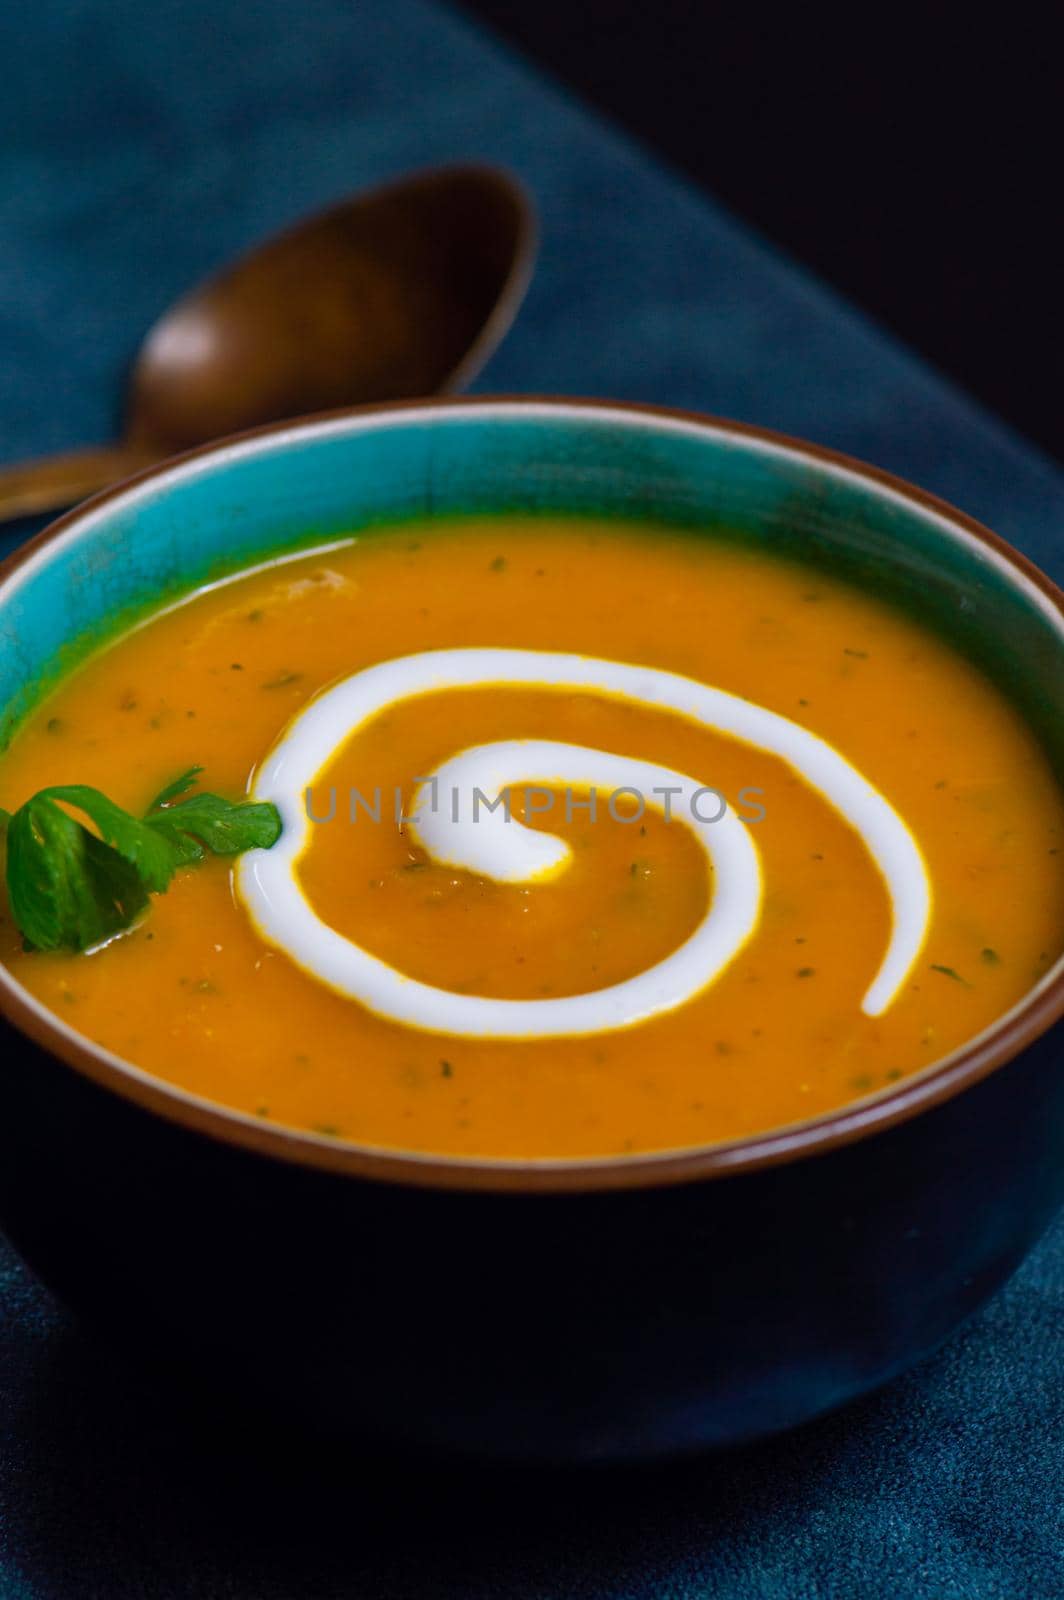 Autumn Carrot and Coriander Soup With Cream by RobertPB